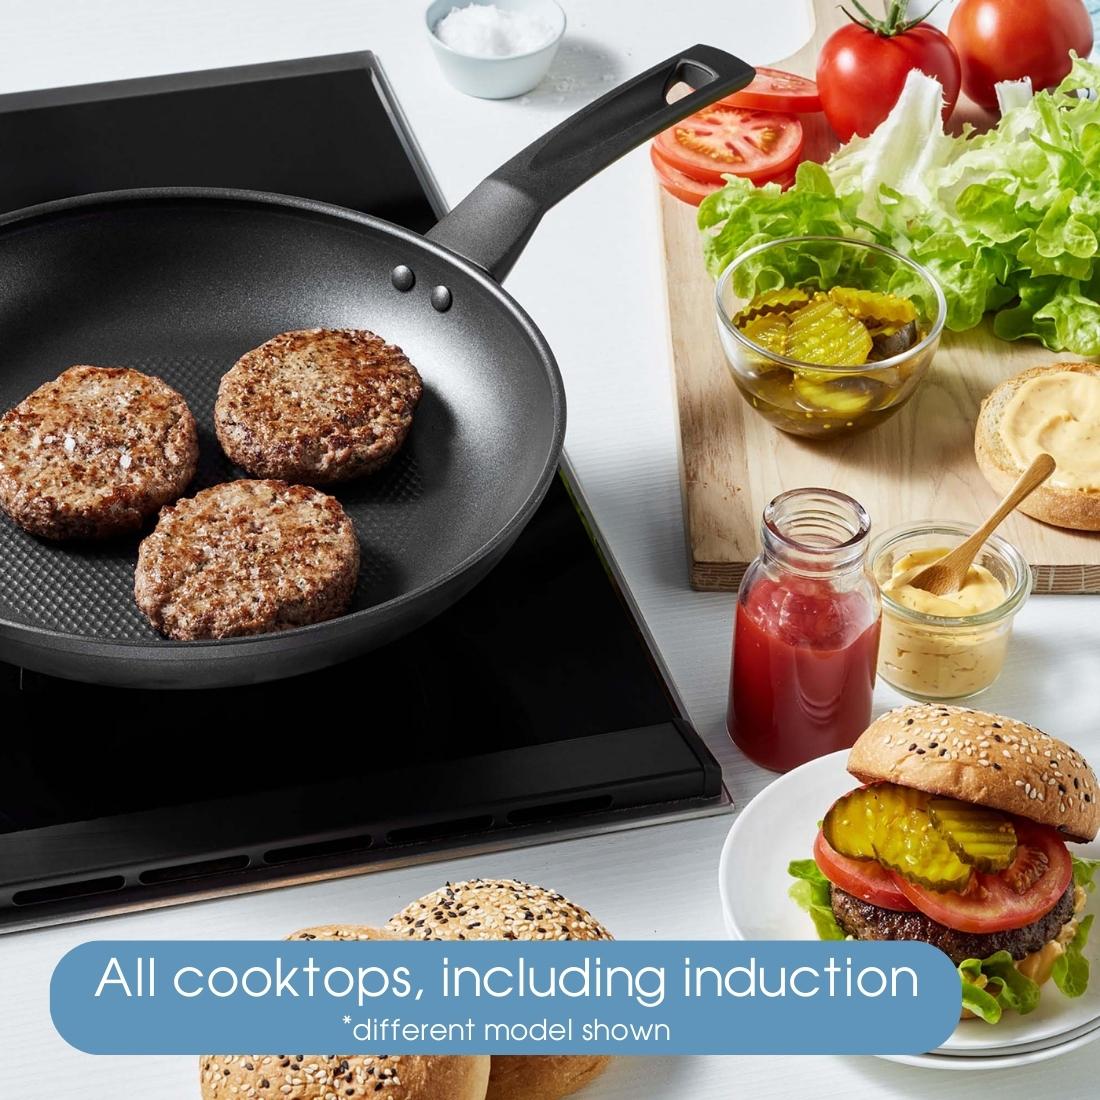 RACO Reliance Nonstick Induction 6 Piece Cookware Set Grey